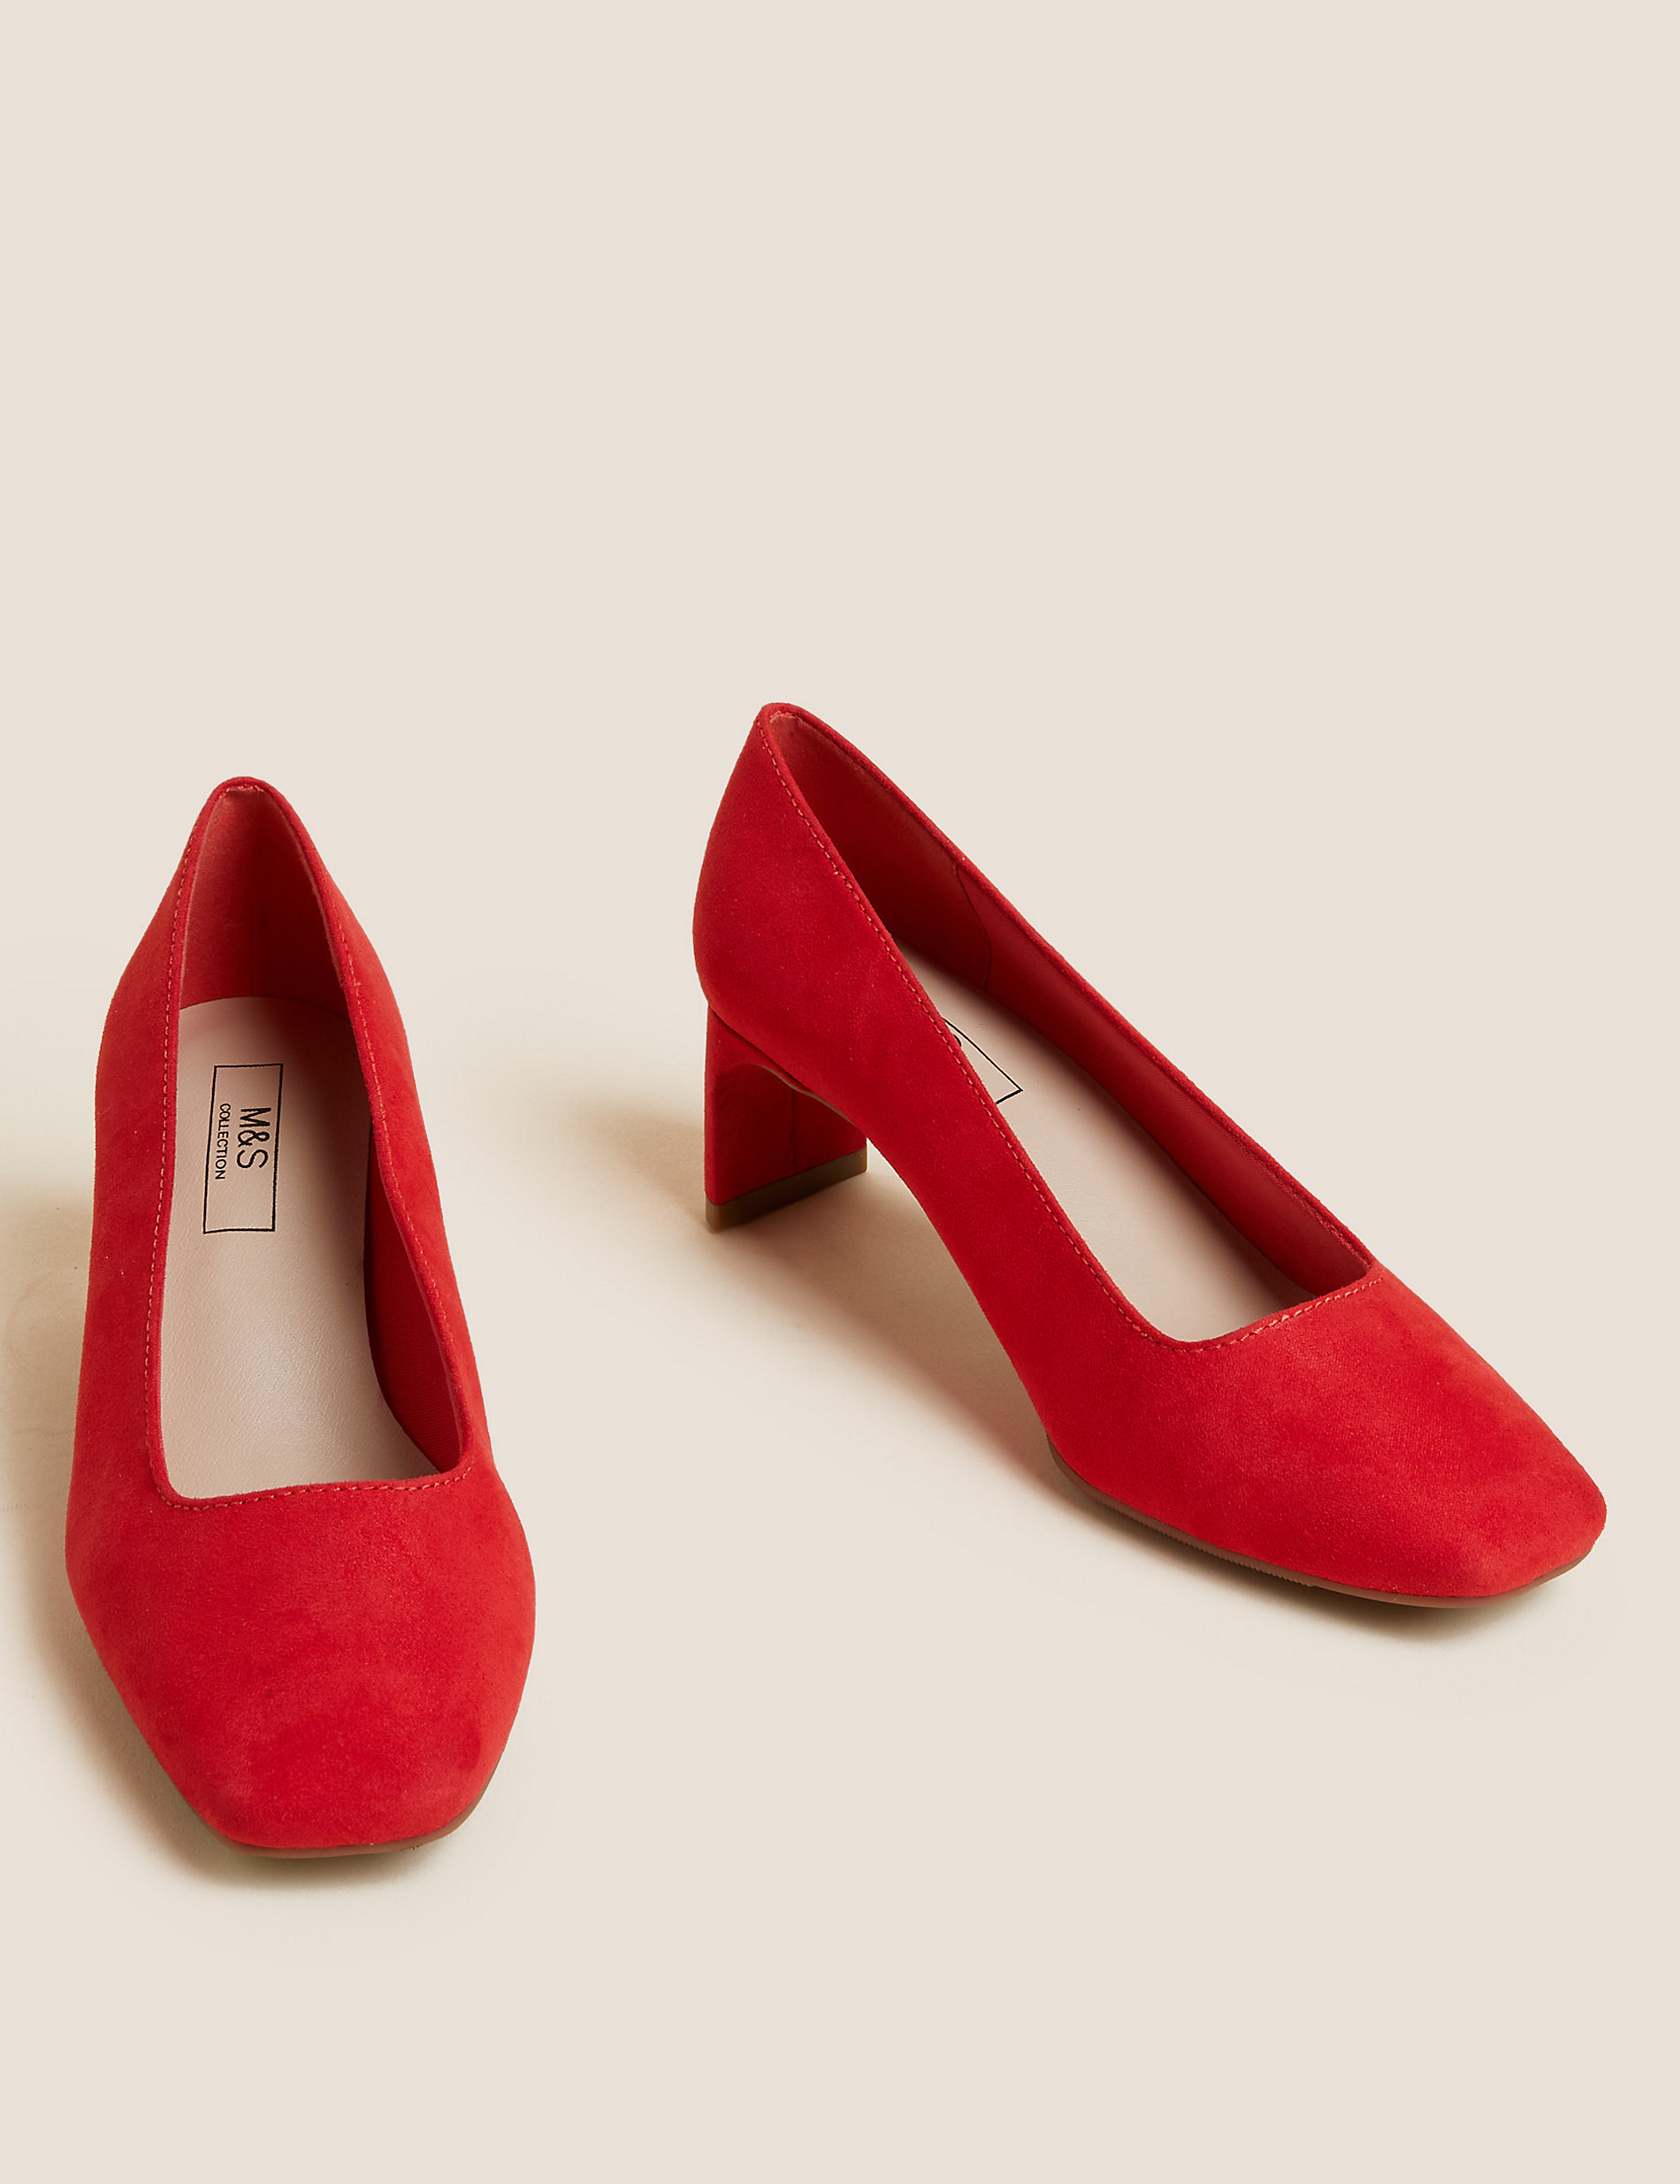 Statement Square Toe Court Shoes